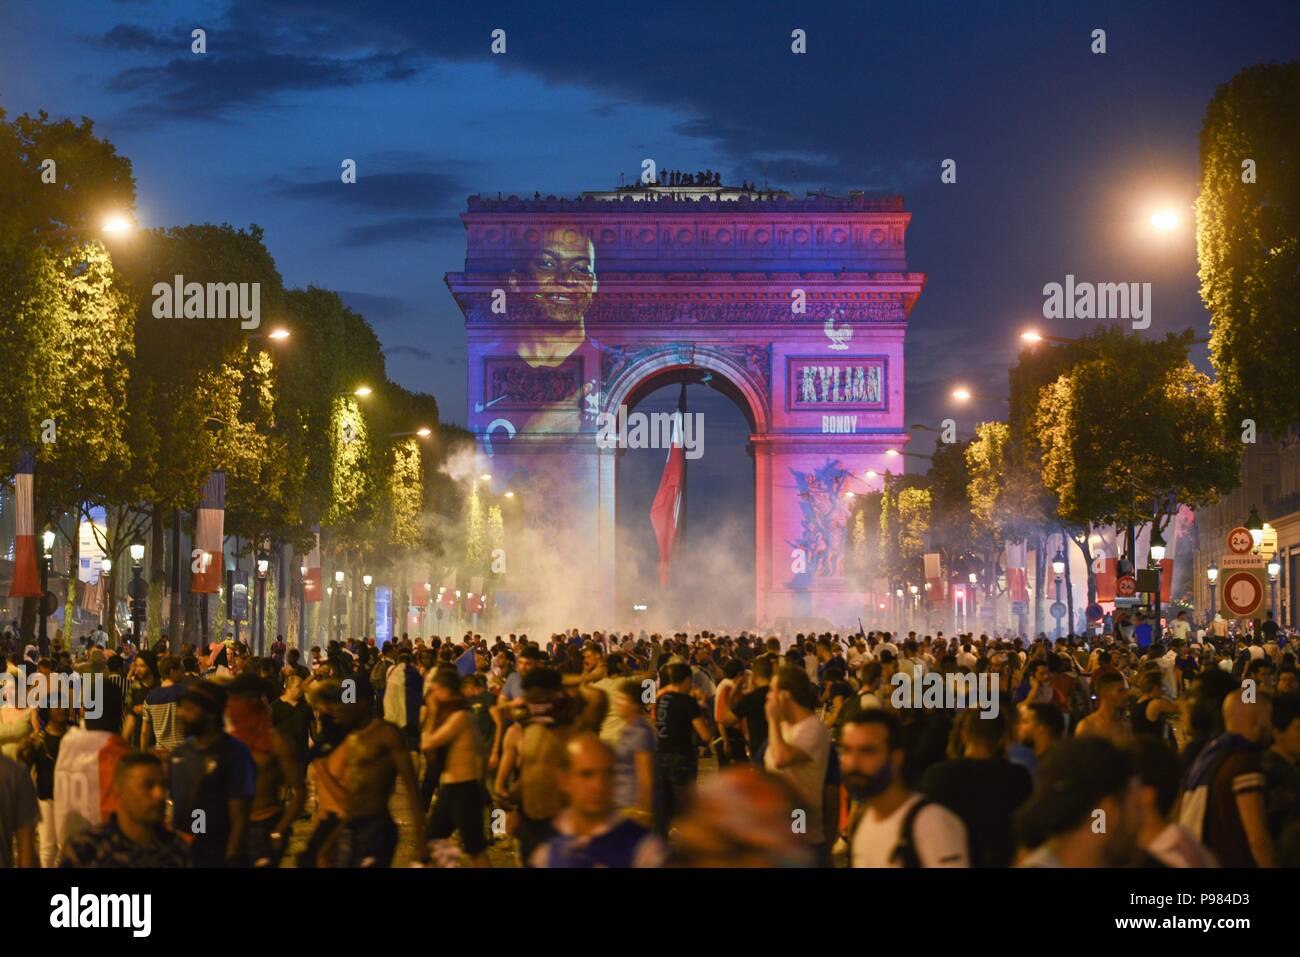 Paris, France. 15th July 2018. French celebrate on the Champs-Elysees avenue after France won the World Cup by beating Croatia 4-2 in the final. Liesse sur l'avenue des Champs-Elysees apres la victoire de l'equipe de France en finale de la Coupe du Monde 4-2 face a la Croatie. *** FRANCE OUT / NO SALES TO FRENCH MEDIA *** Credit: Idealink Photography/Alamy Live News Stock Photo